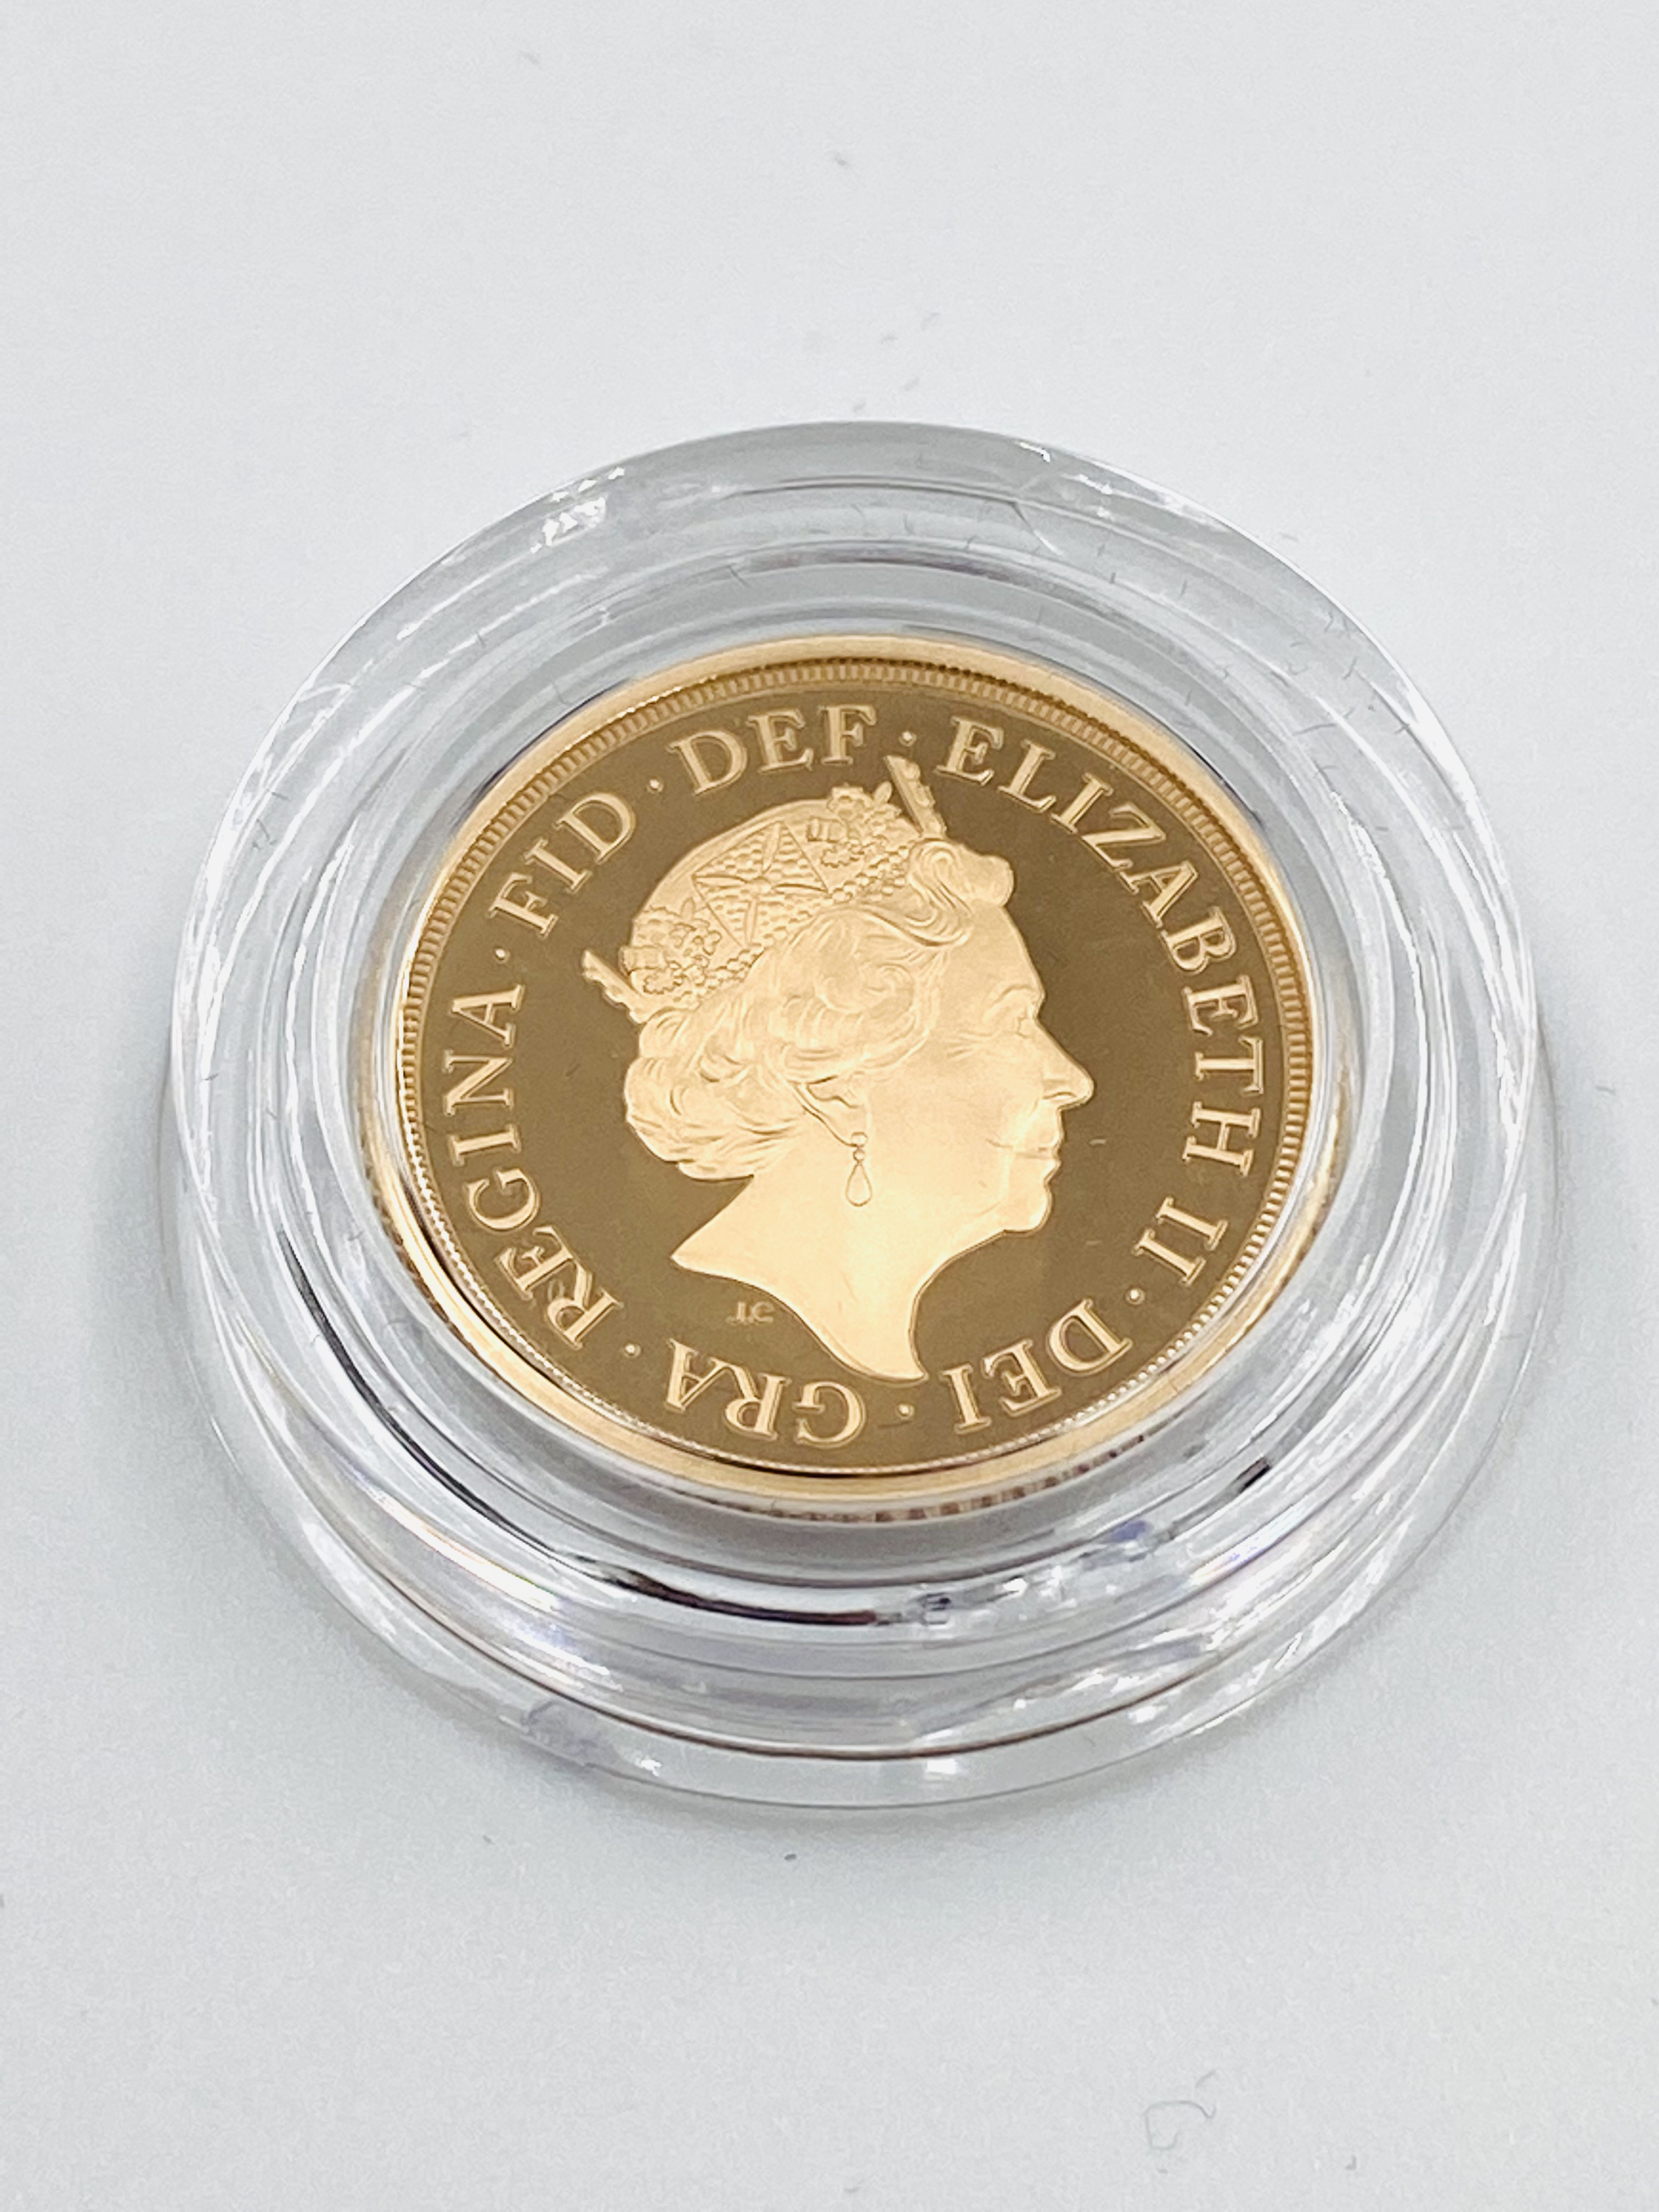 Royal Mint 2021 limited edition 22ct gold proof sovereign - Image 3 of 4